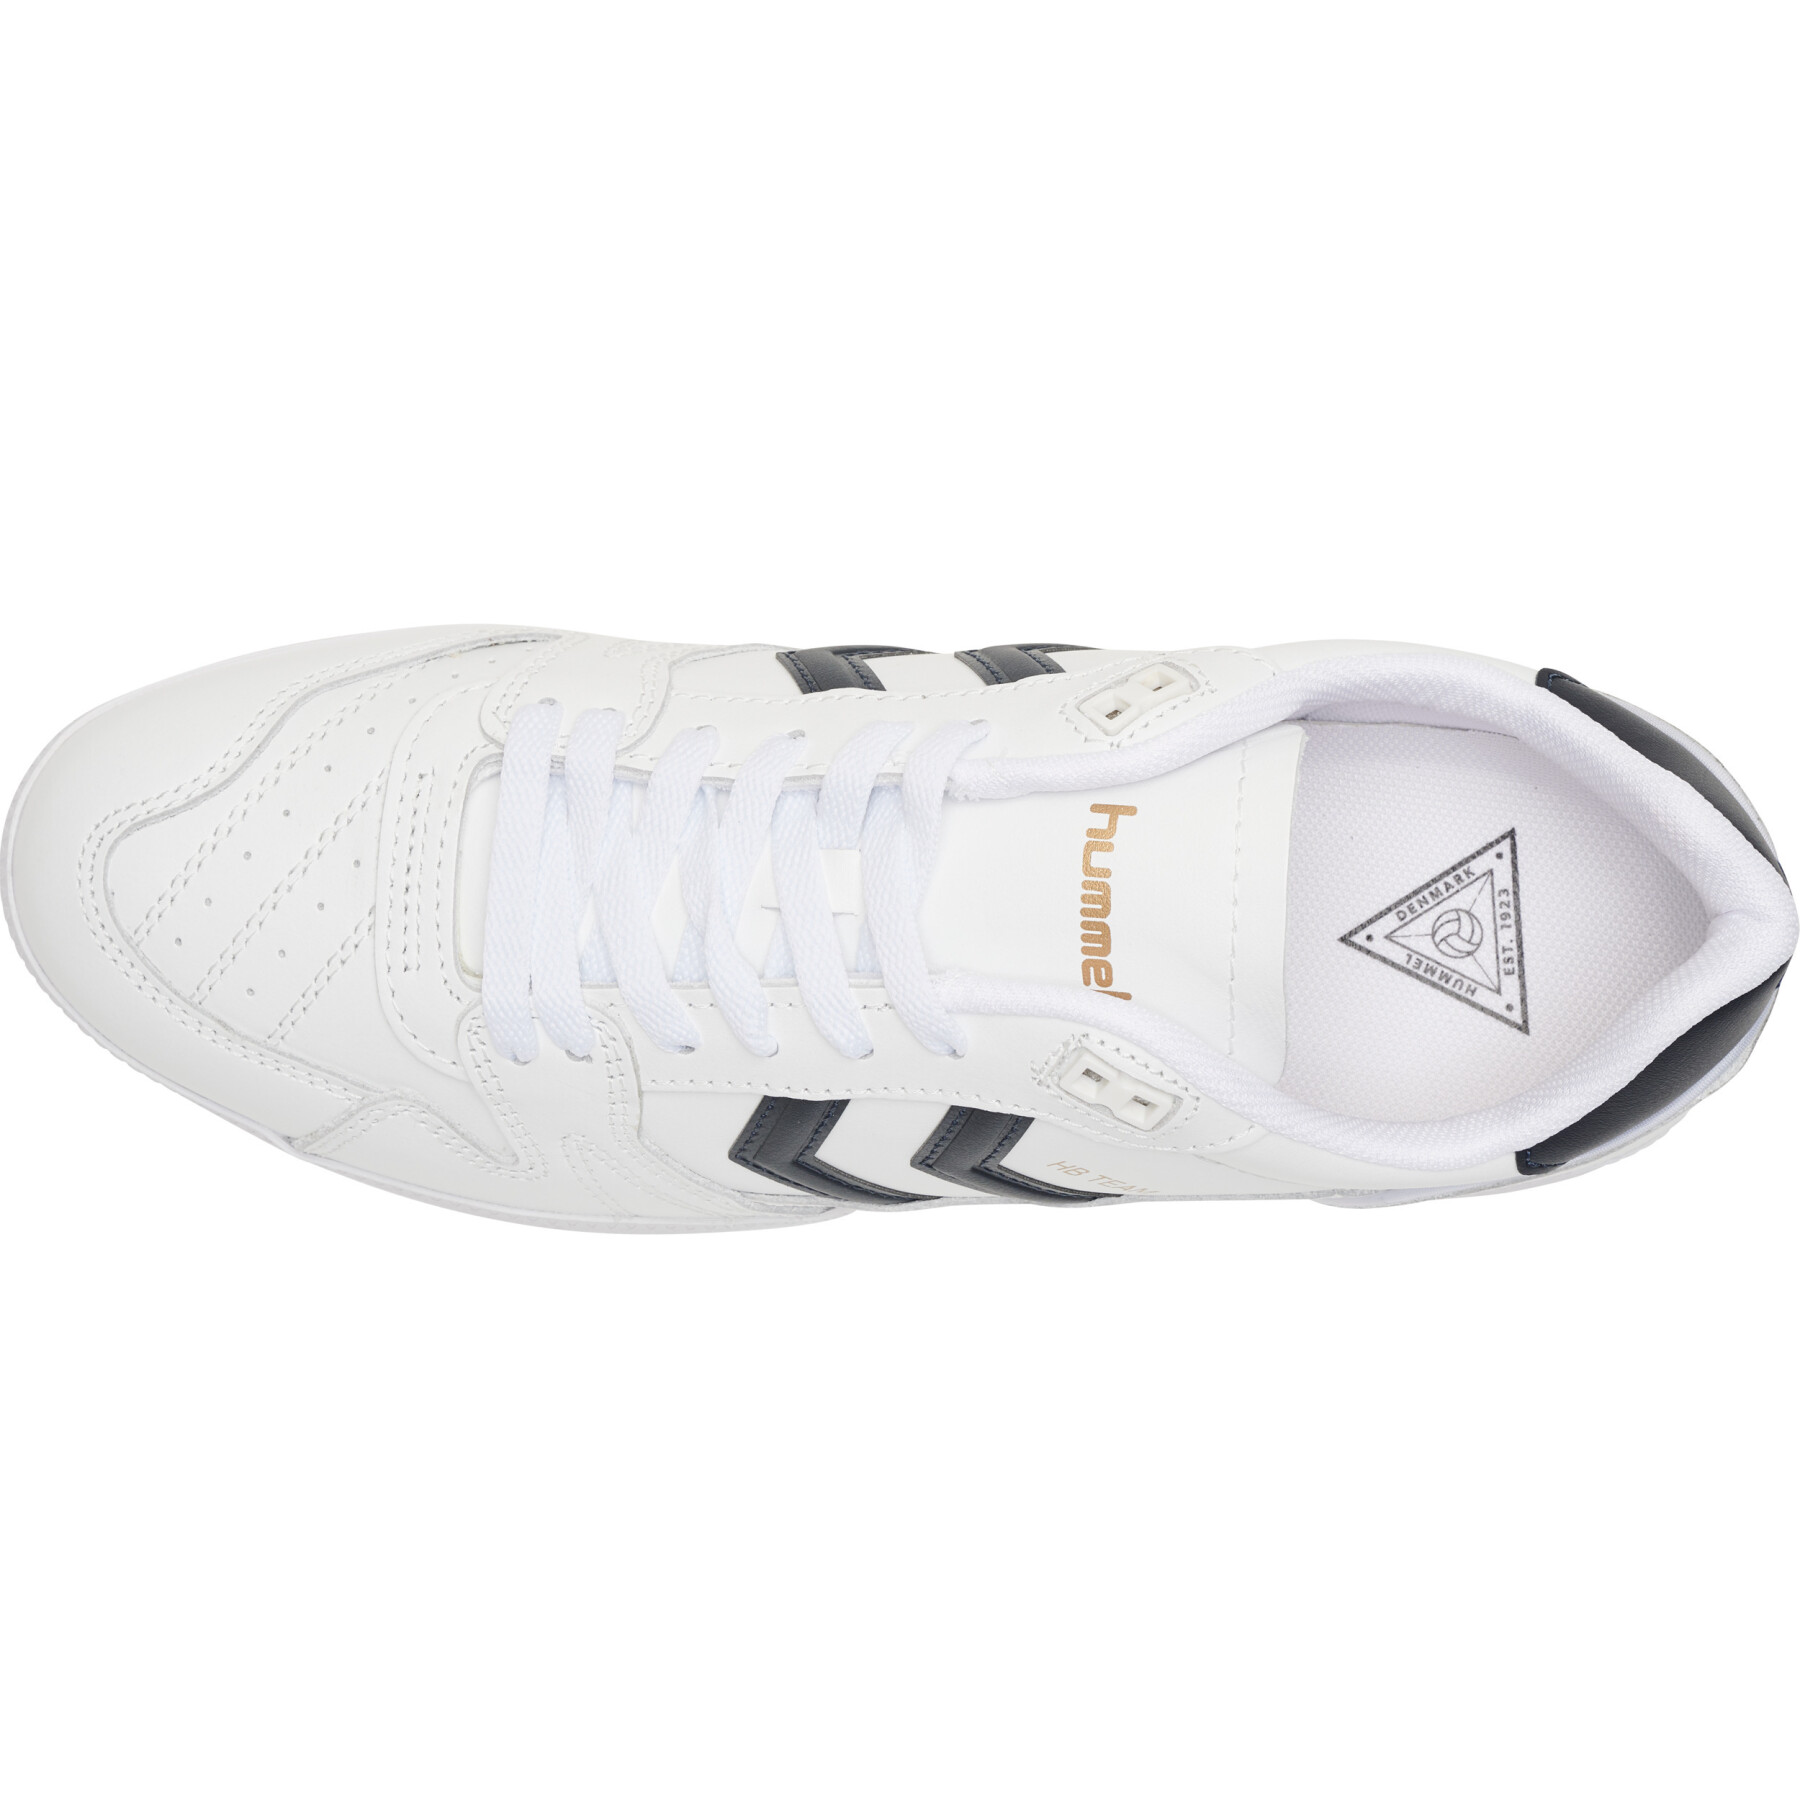 Trainers Hummel Hb Team Leather